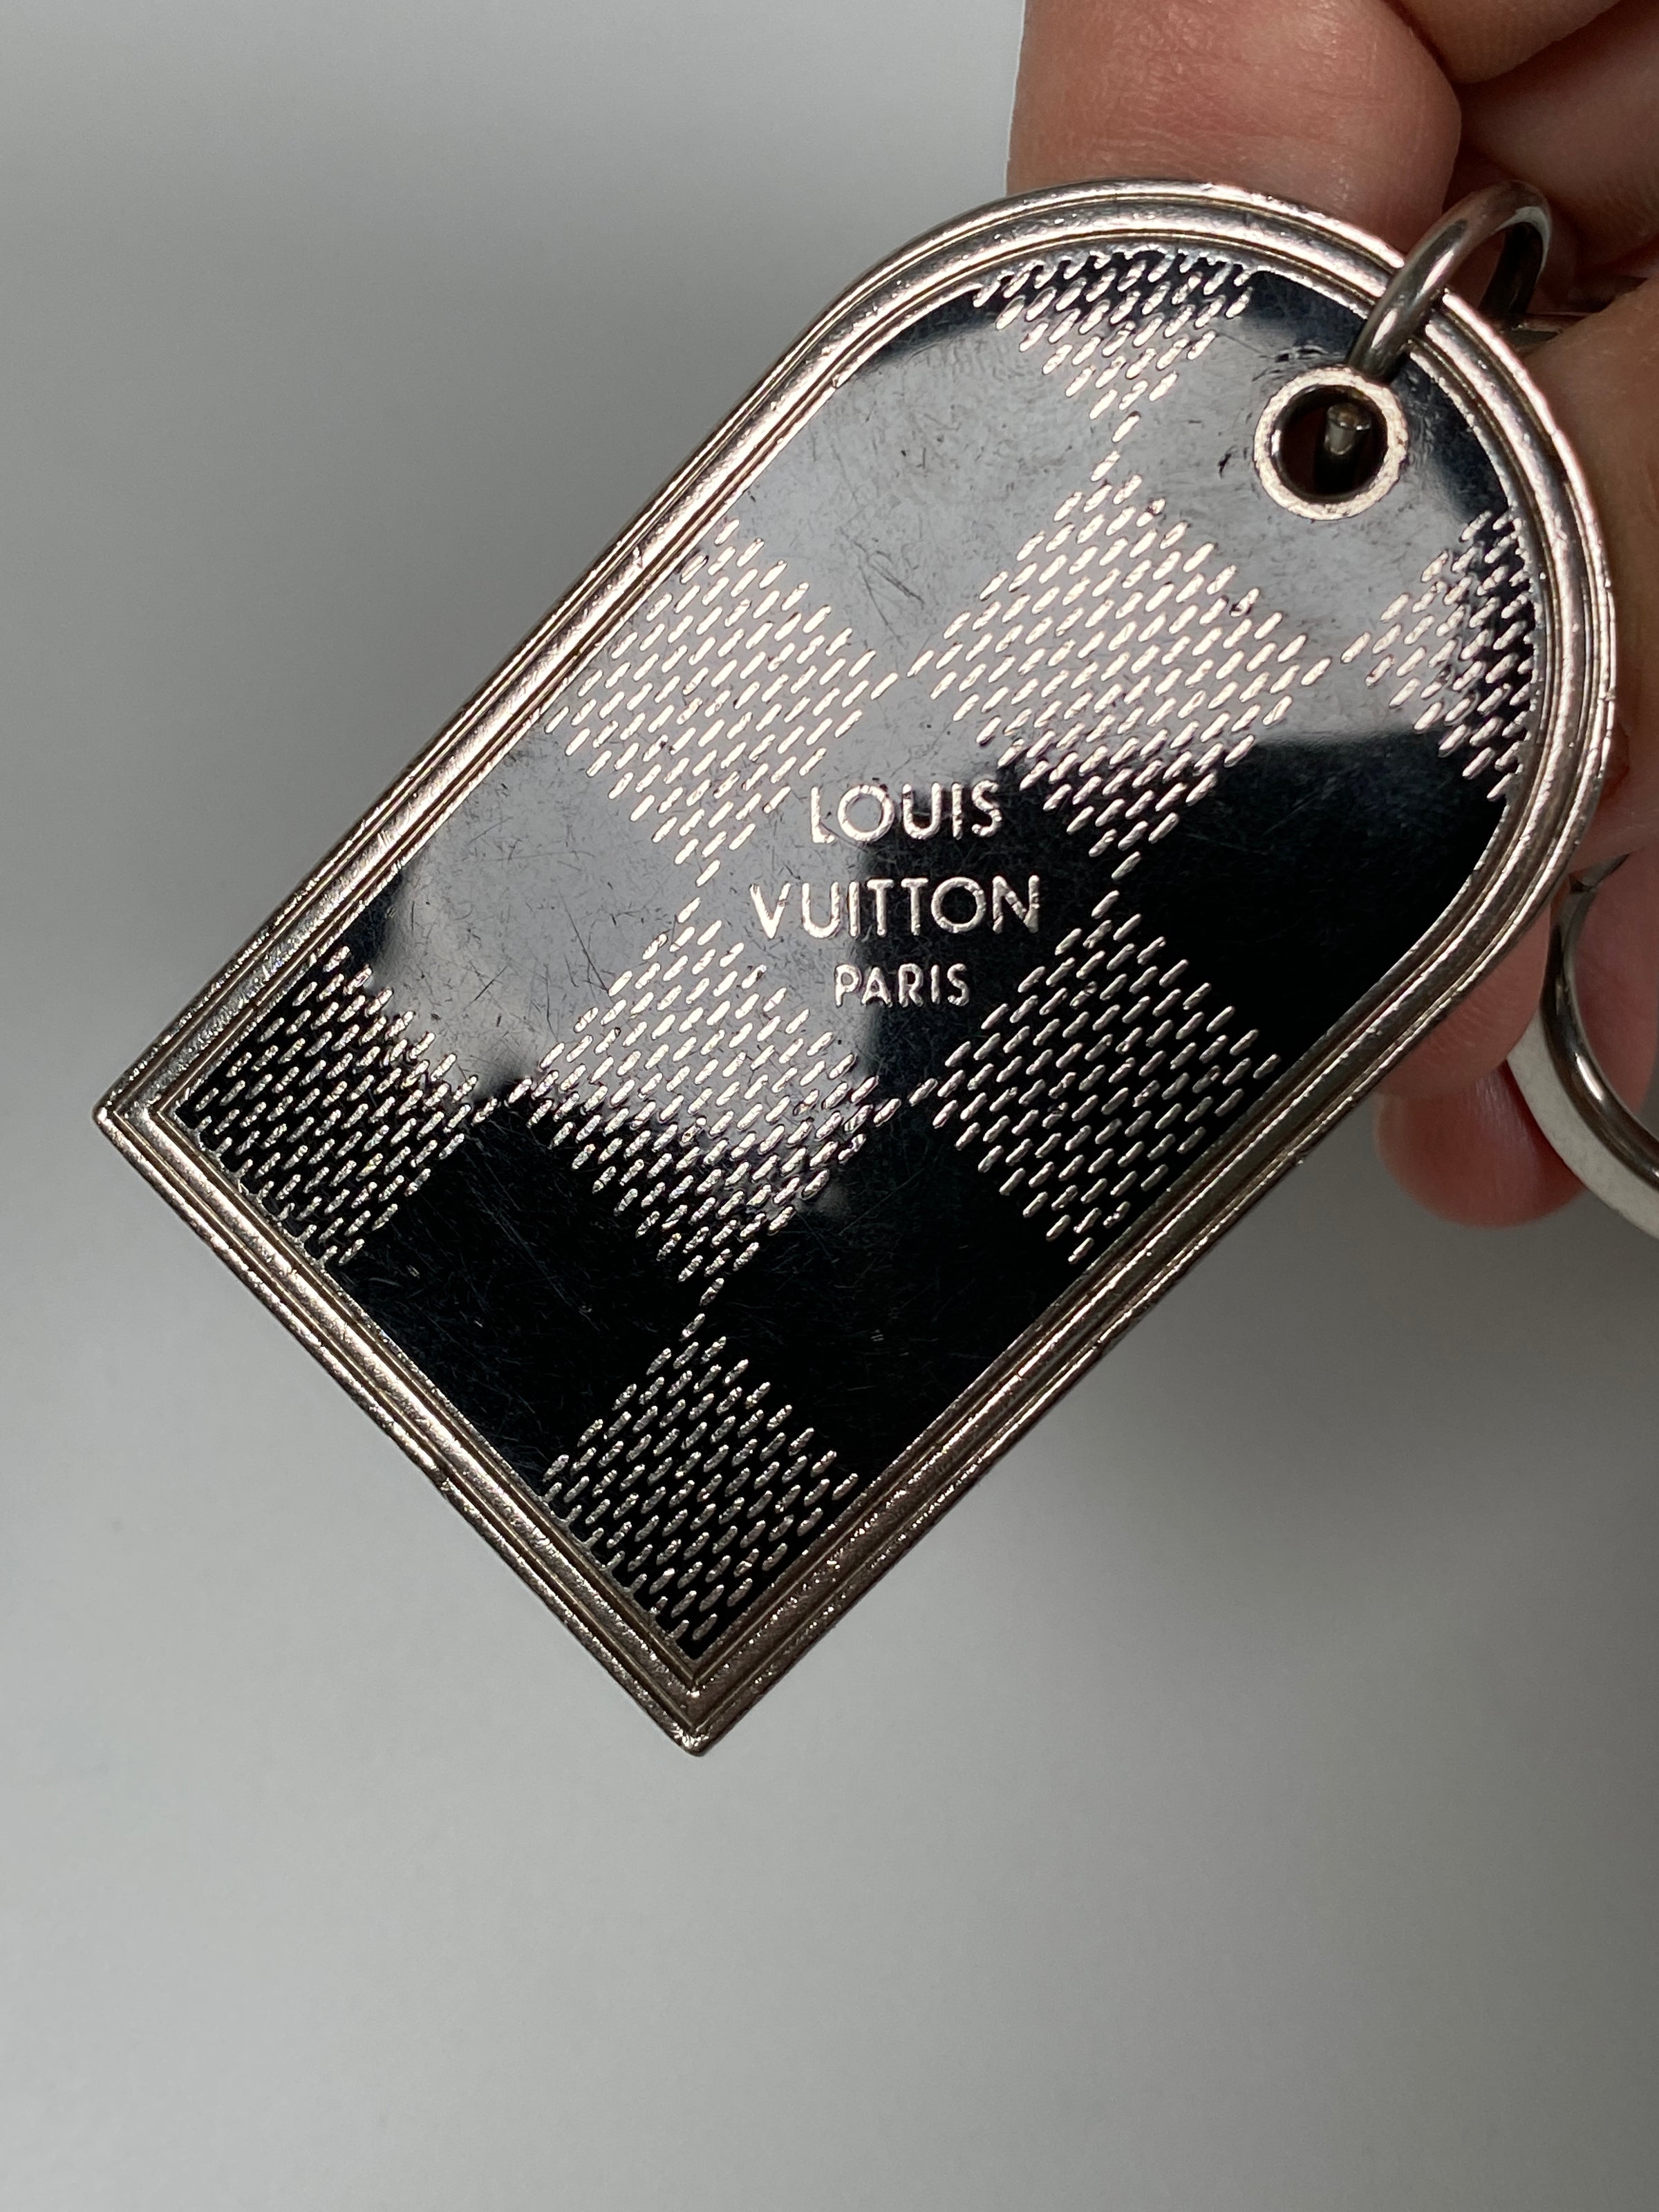 LOUIS VUITTON- Metal Luggage Tag Key Holder Silver/Key Ring. CONDITION:  Like NEW - FULL BOX - PRICE: R8500 @_ygs.luxury.preloved_